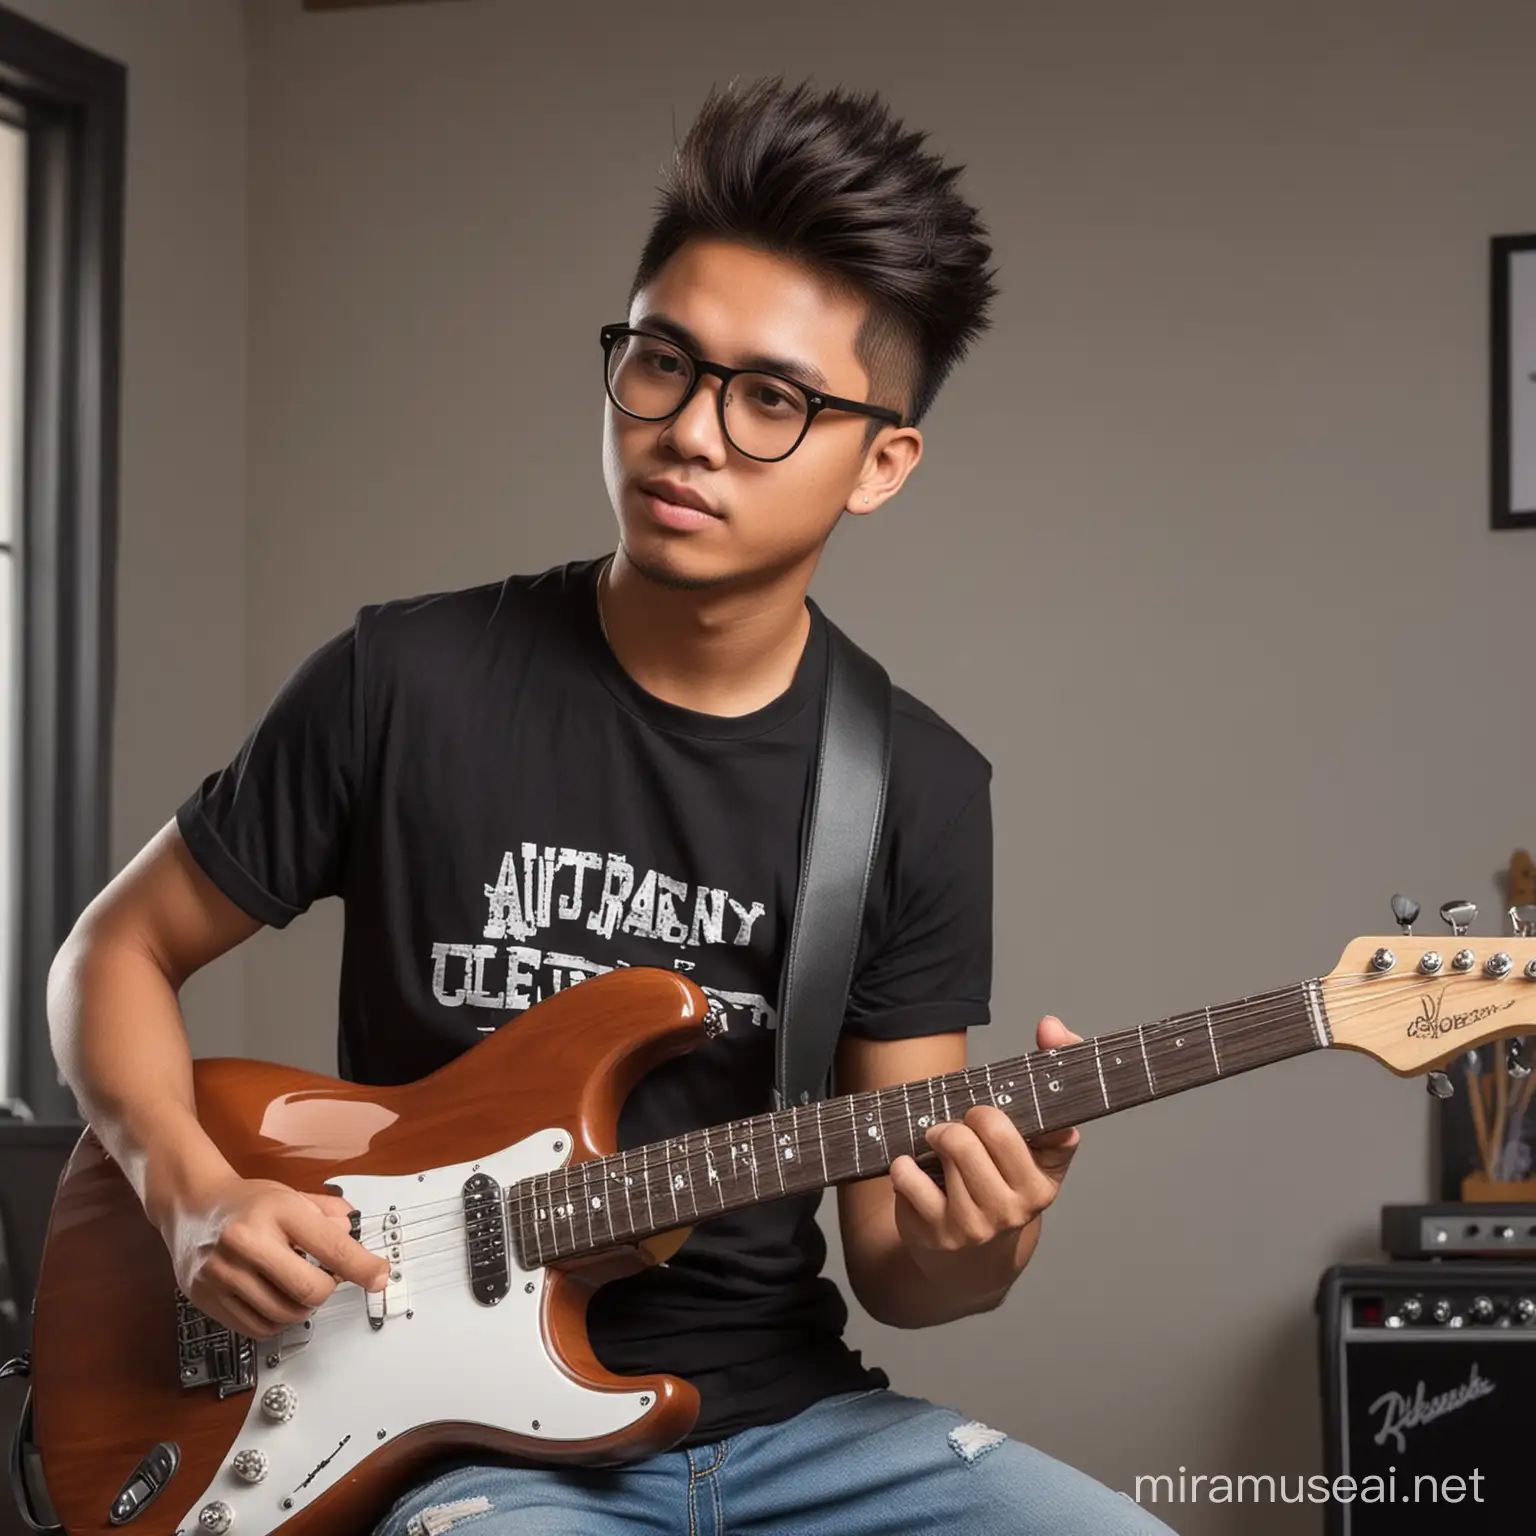 Handsome Filipino Teenager Playing Electric Guitar in Music Room